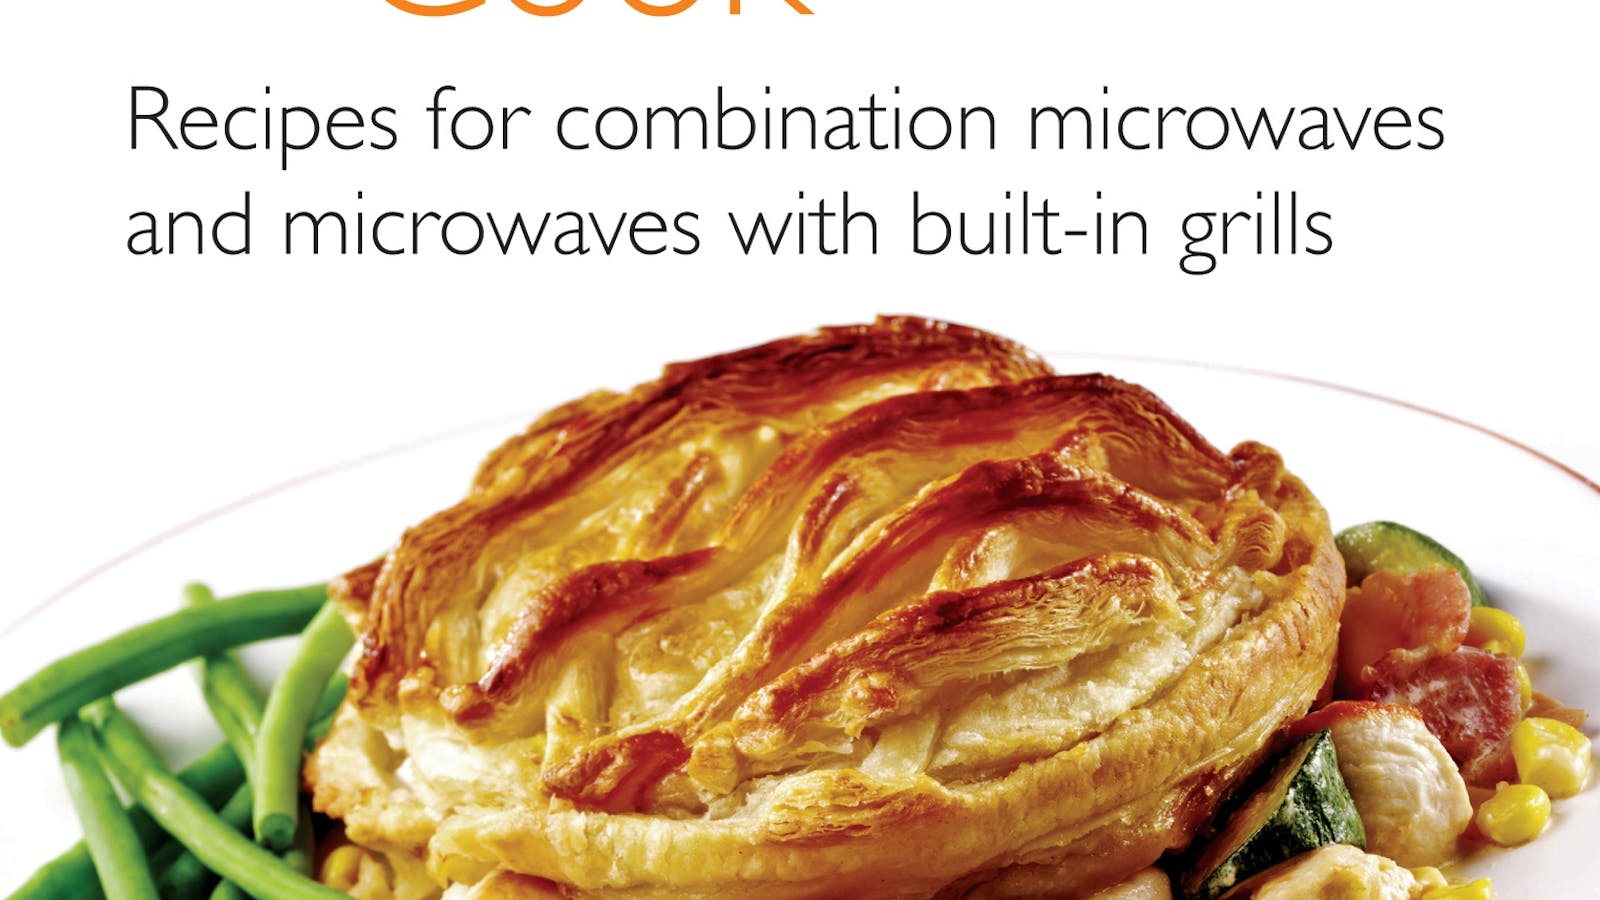 The Combination Microwave Cook: Recipes for Combination Microwaves and